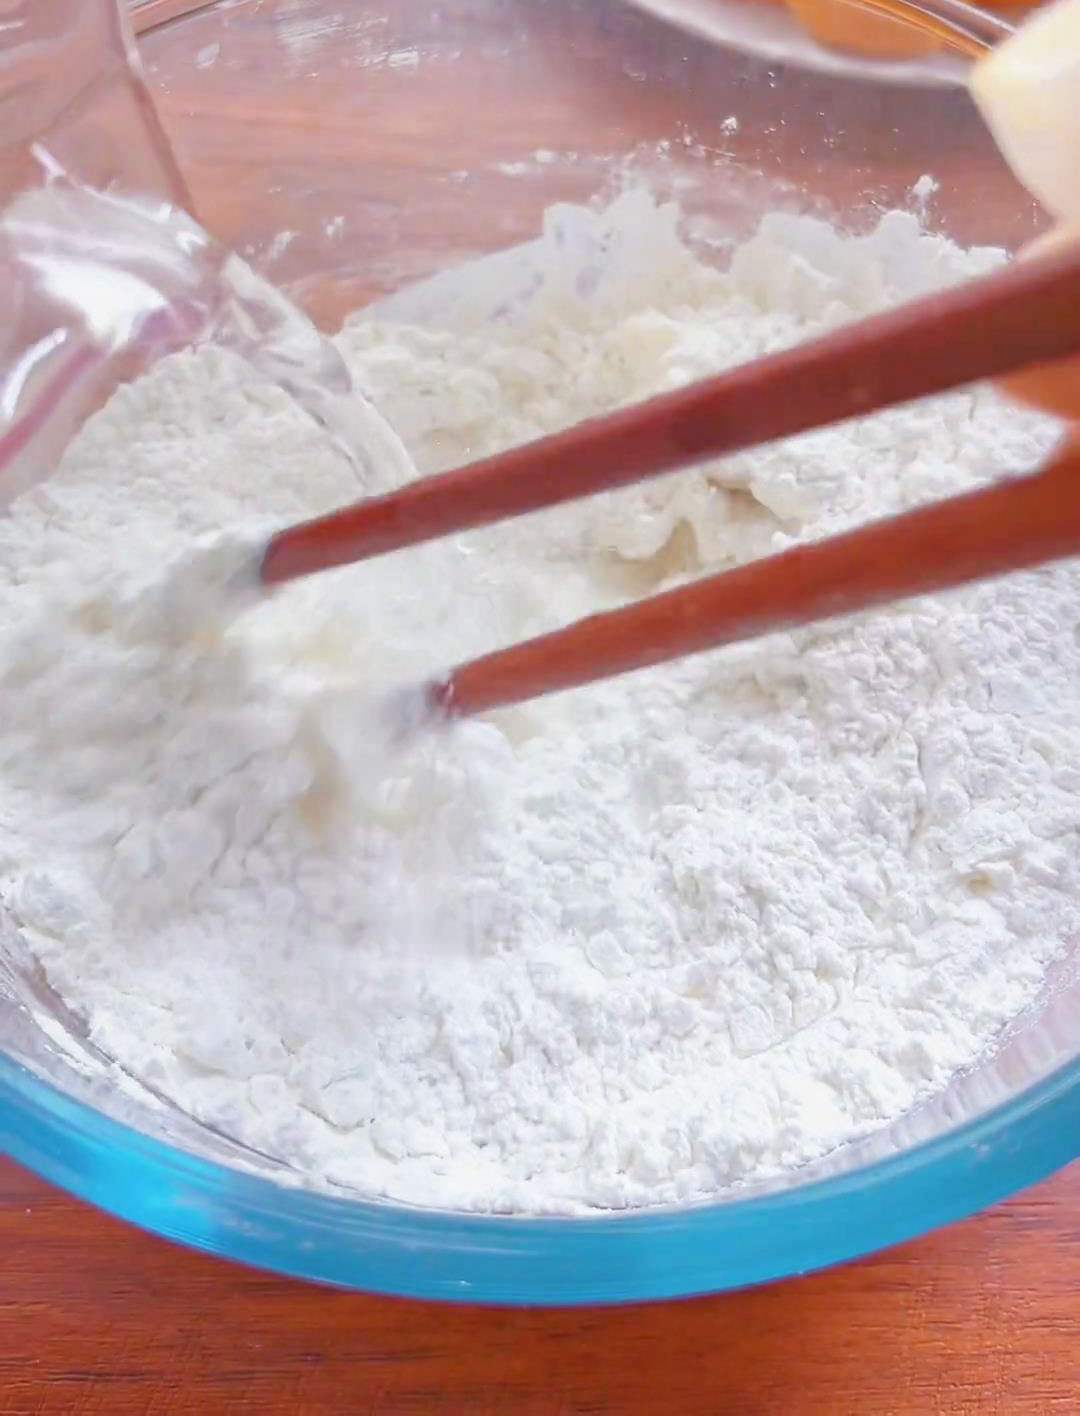 Gradually add 170g of boiling water to the flour mixture